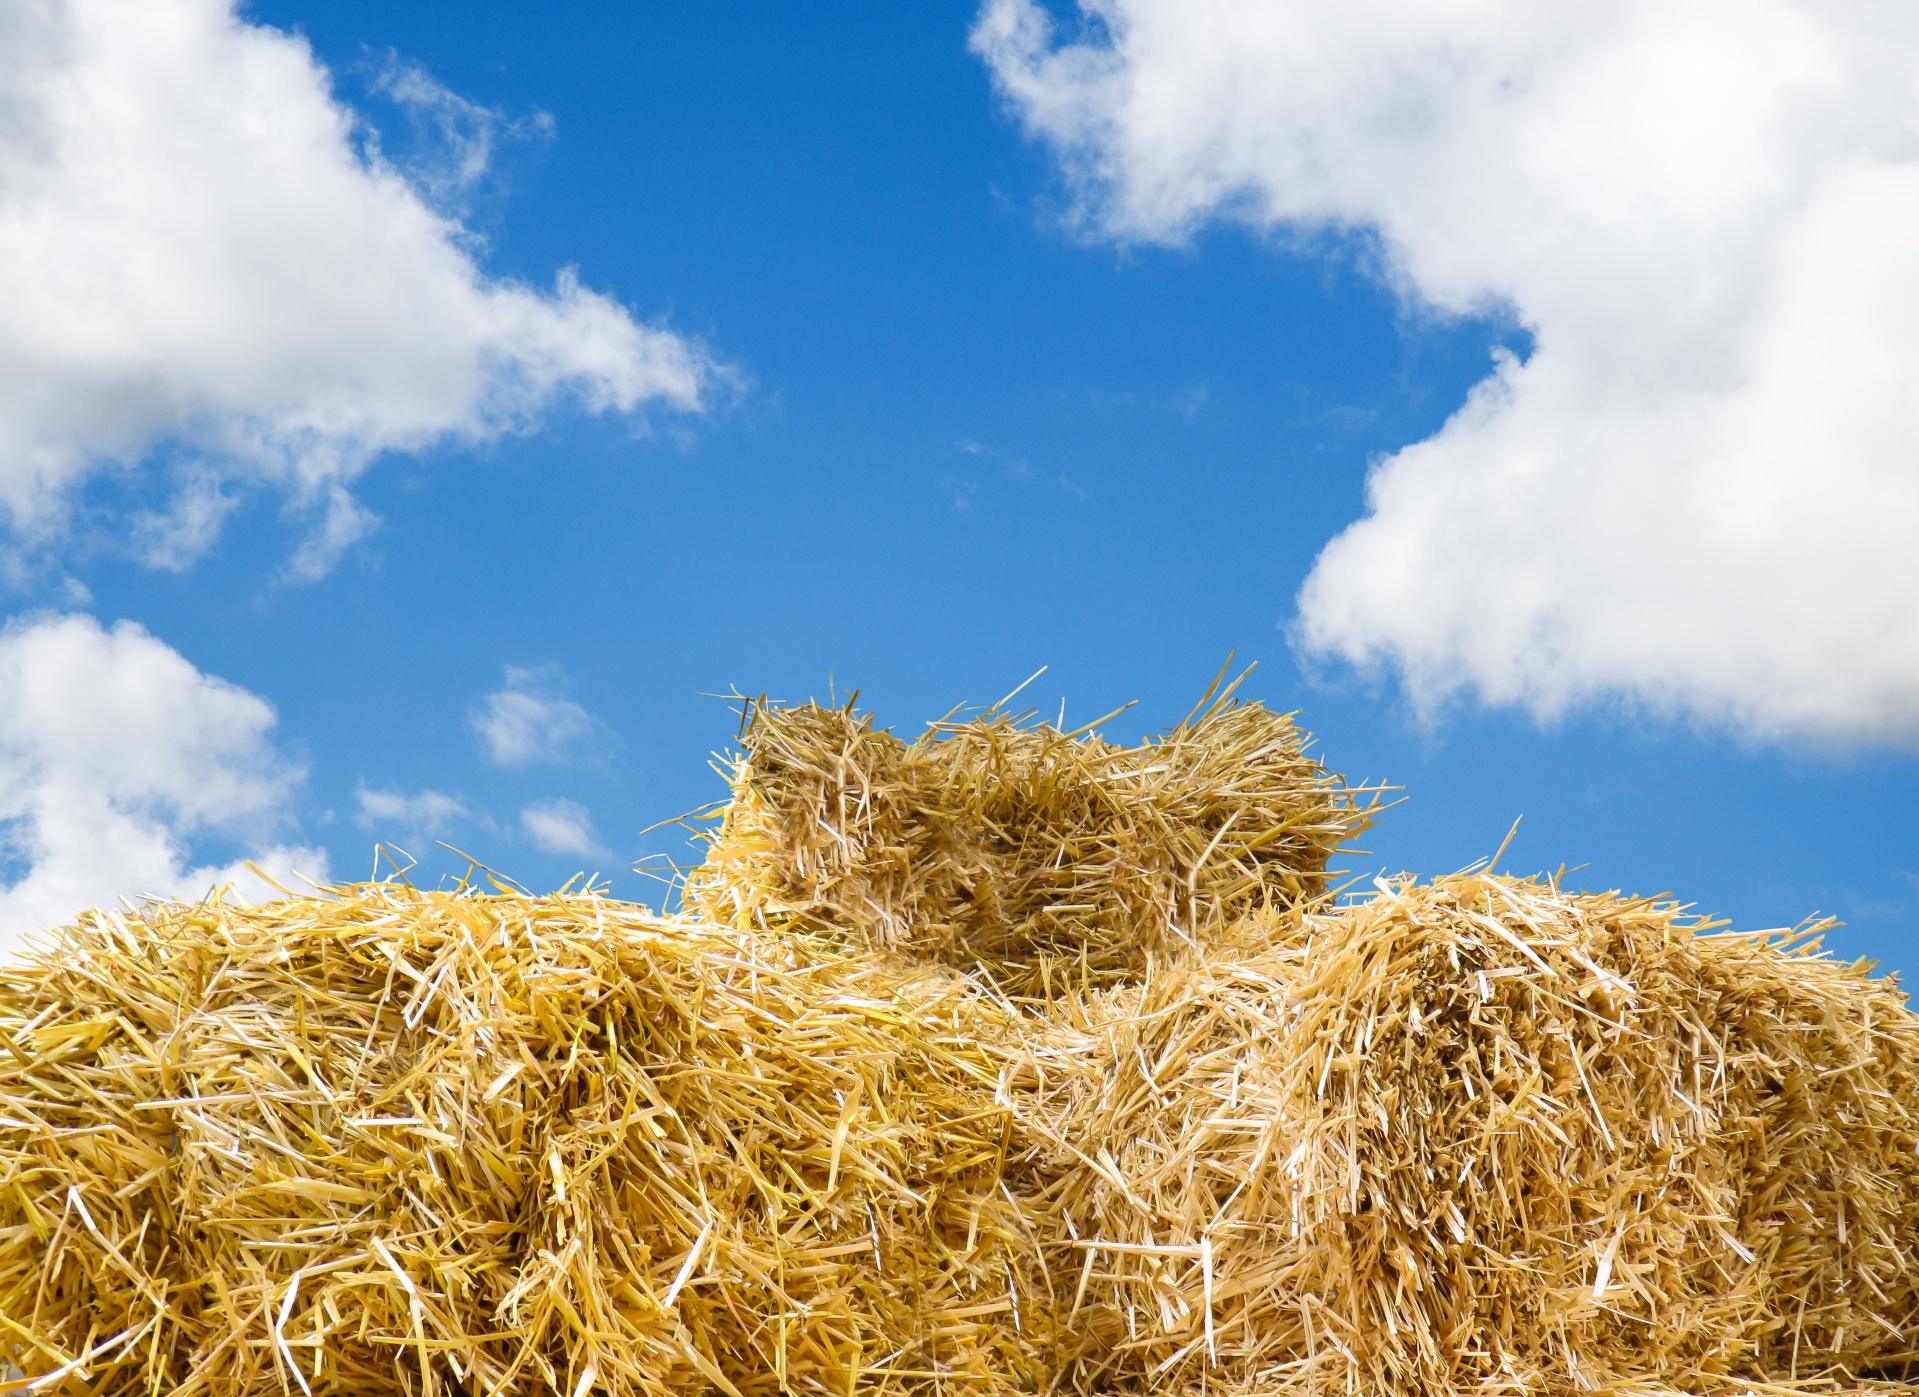 Hay bales against blue sky and white clouds